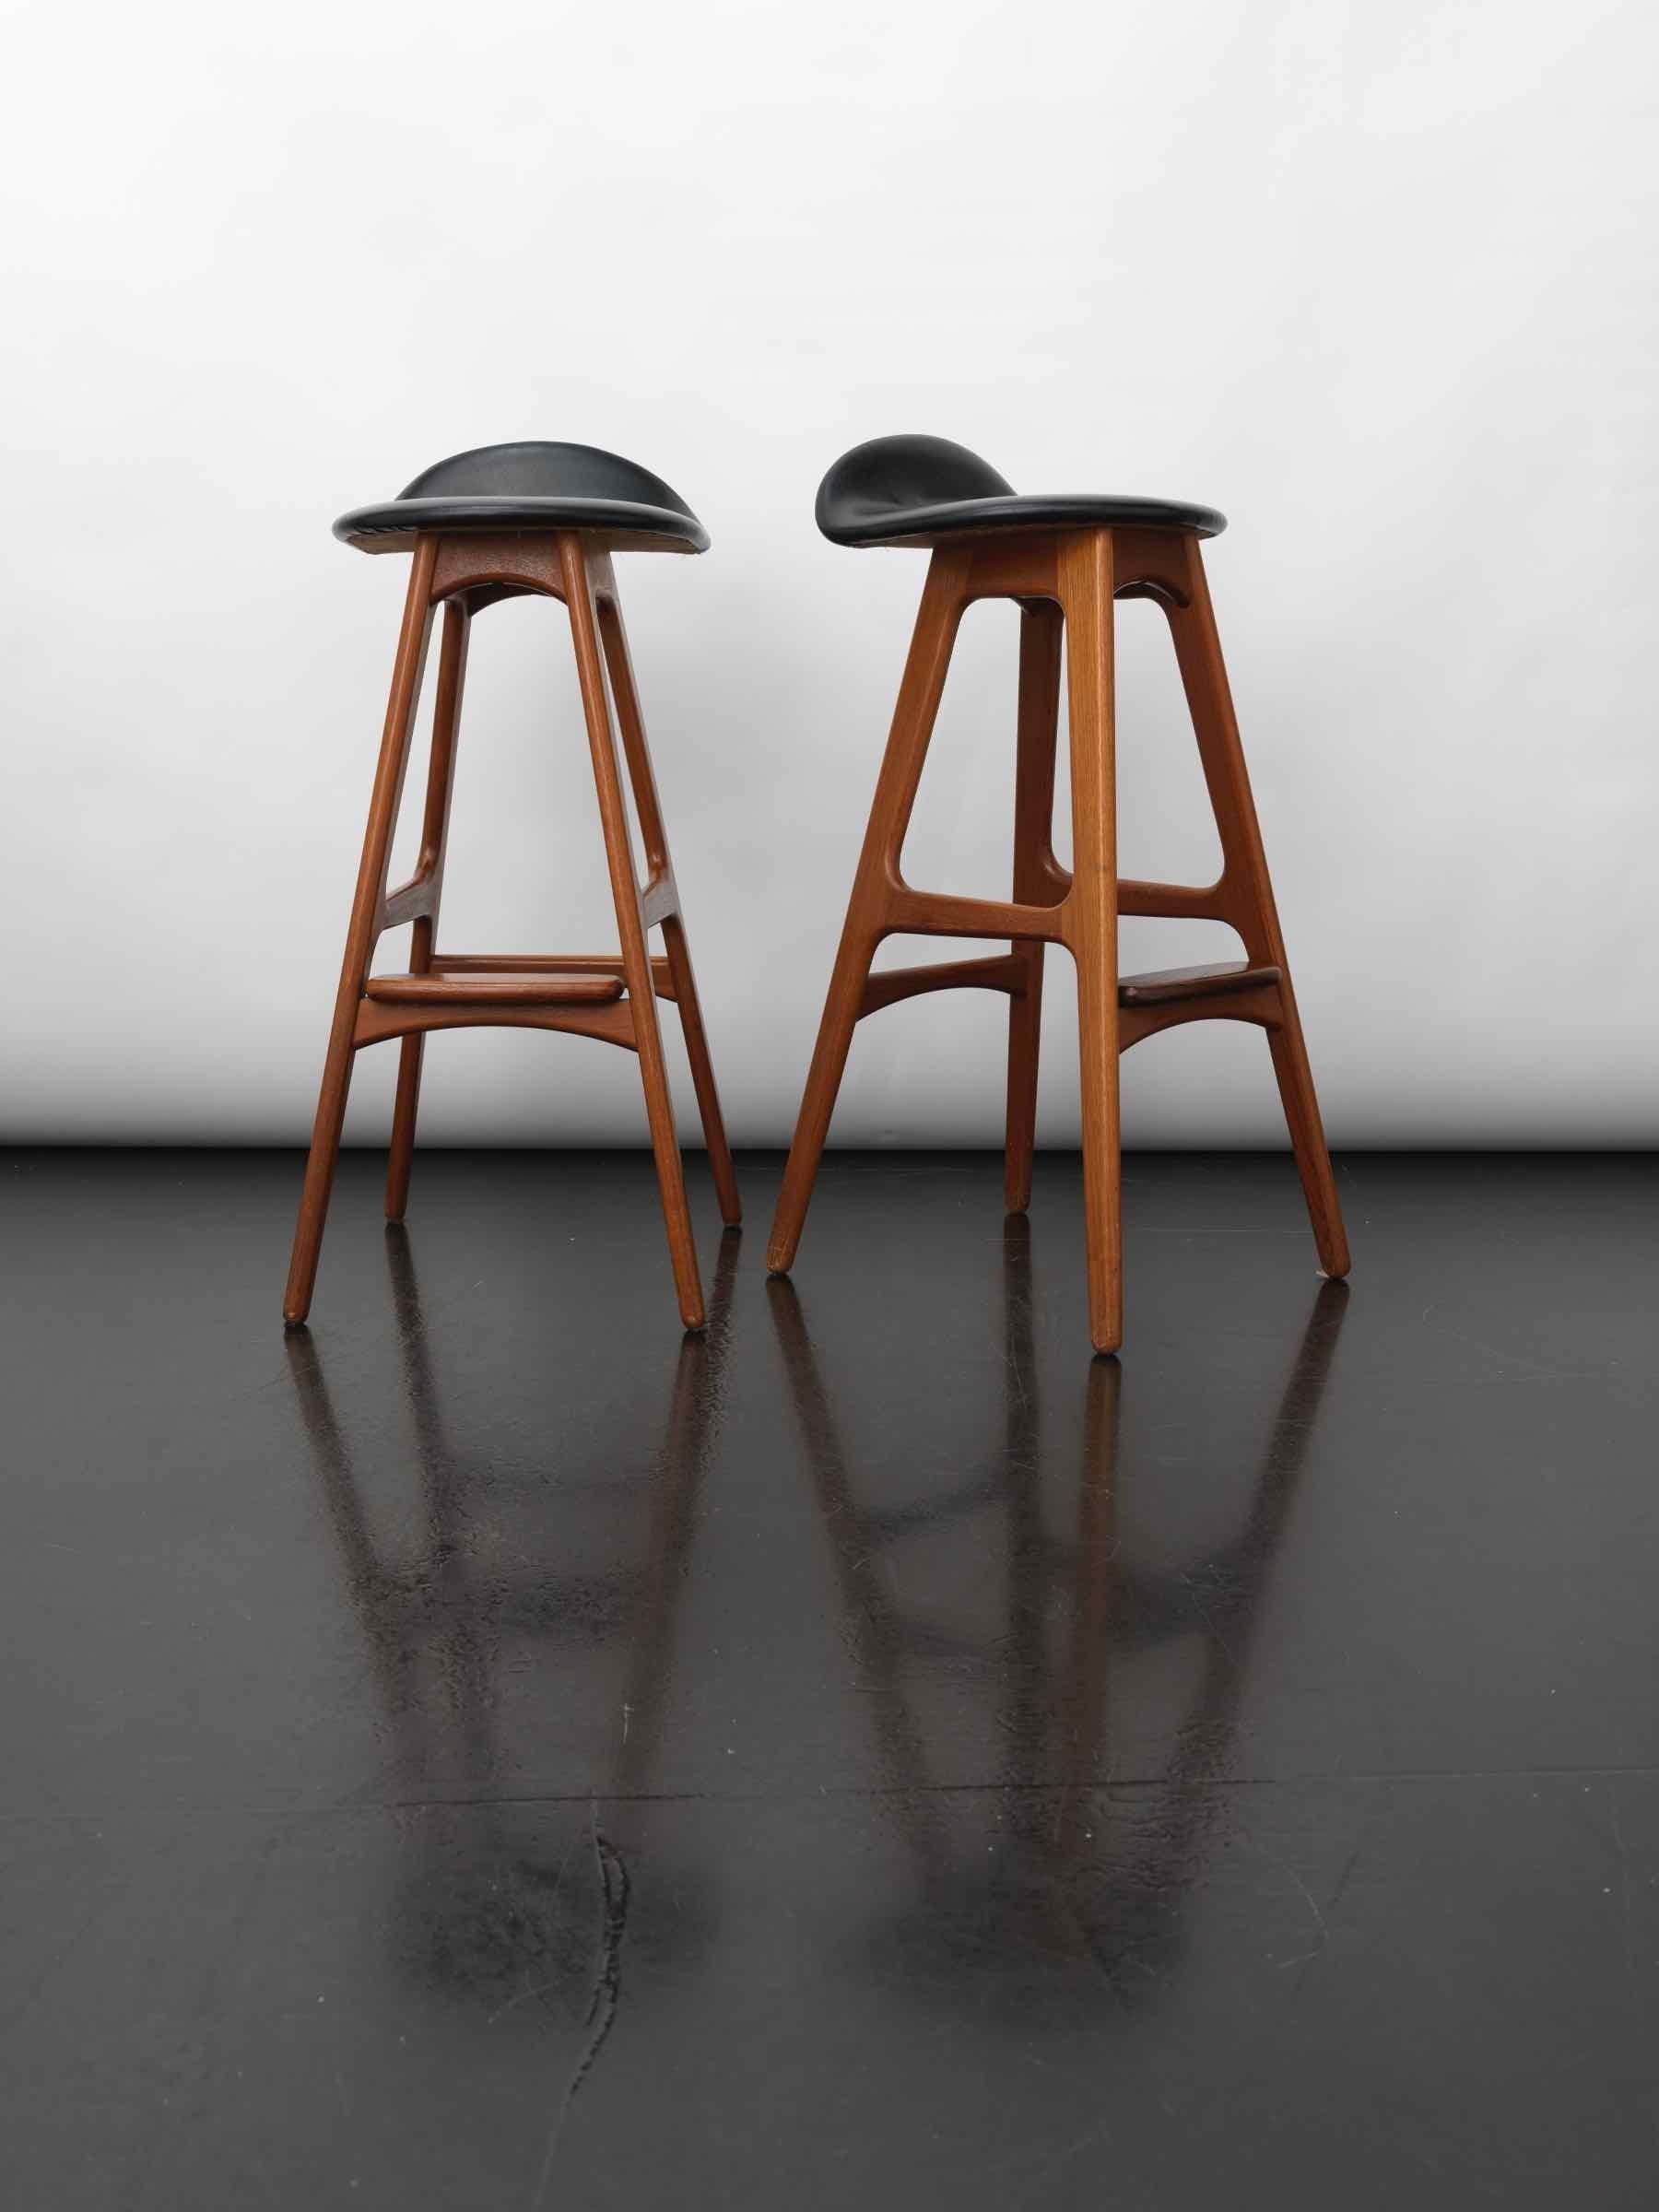 A pair of Model 61 bar stools designed by Erik Buck (Buch), Denmark 1960s.
Solid teak construction and true Danish craftsmanship.
Very good condition.
Price is for the set of 2.